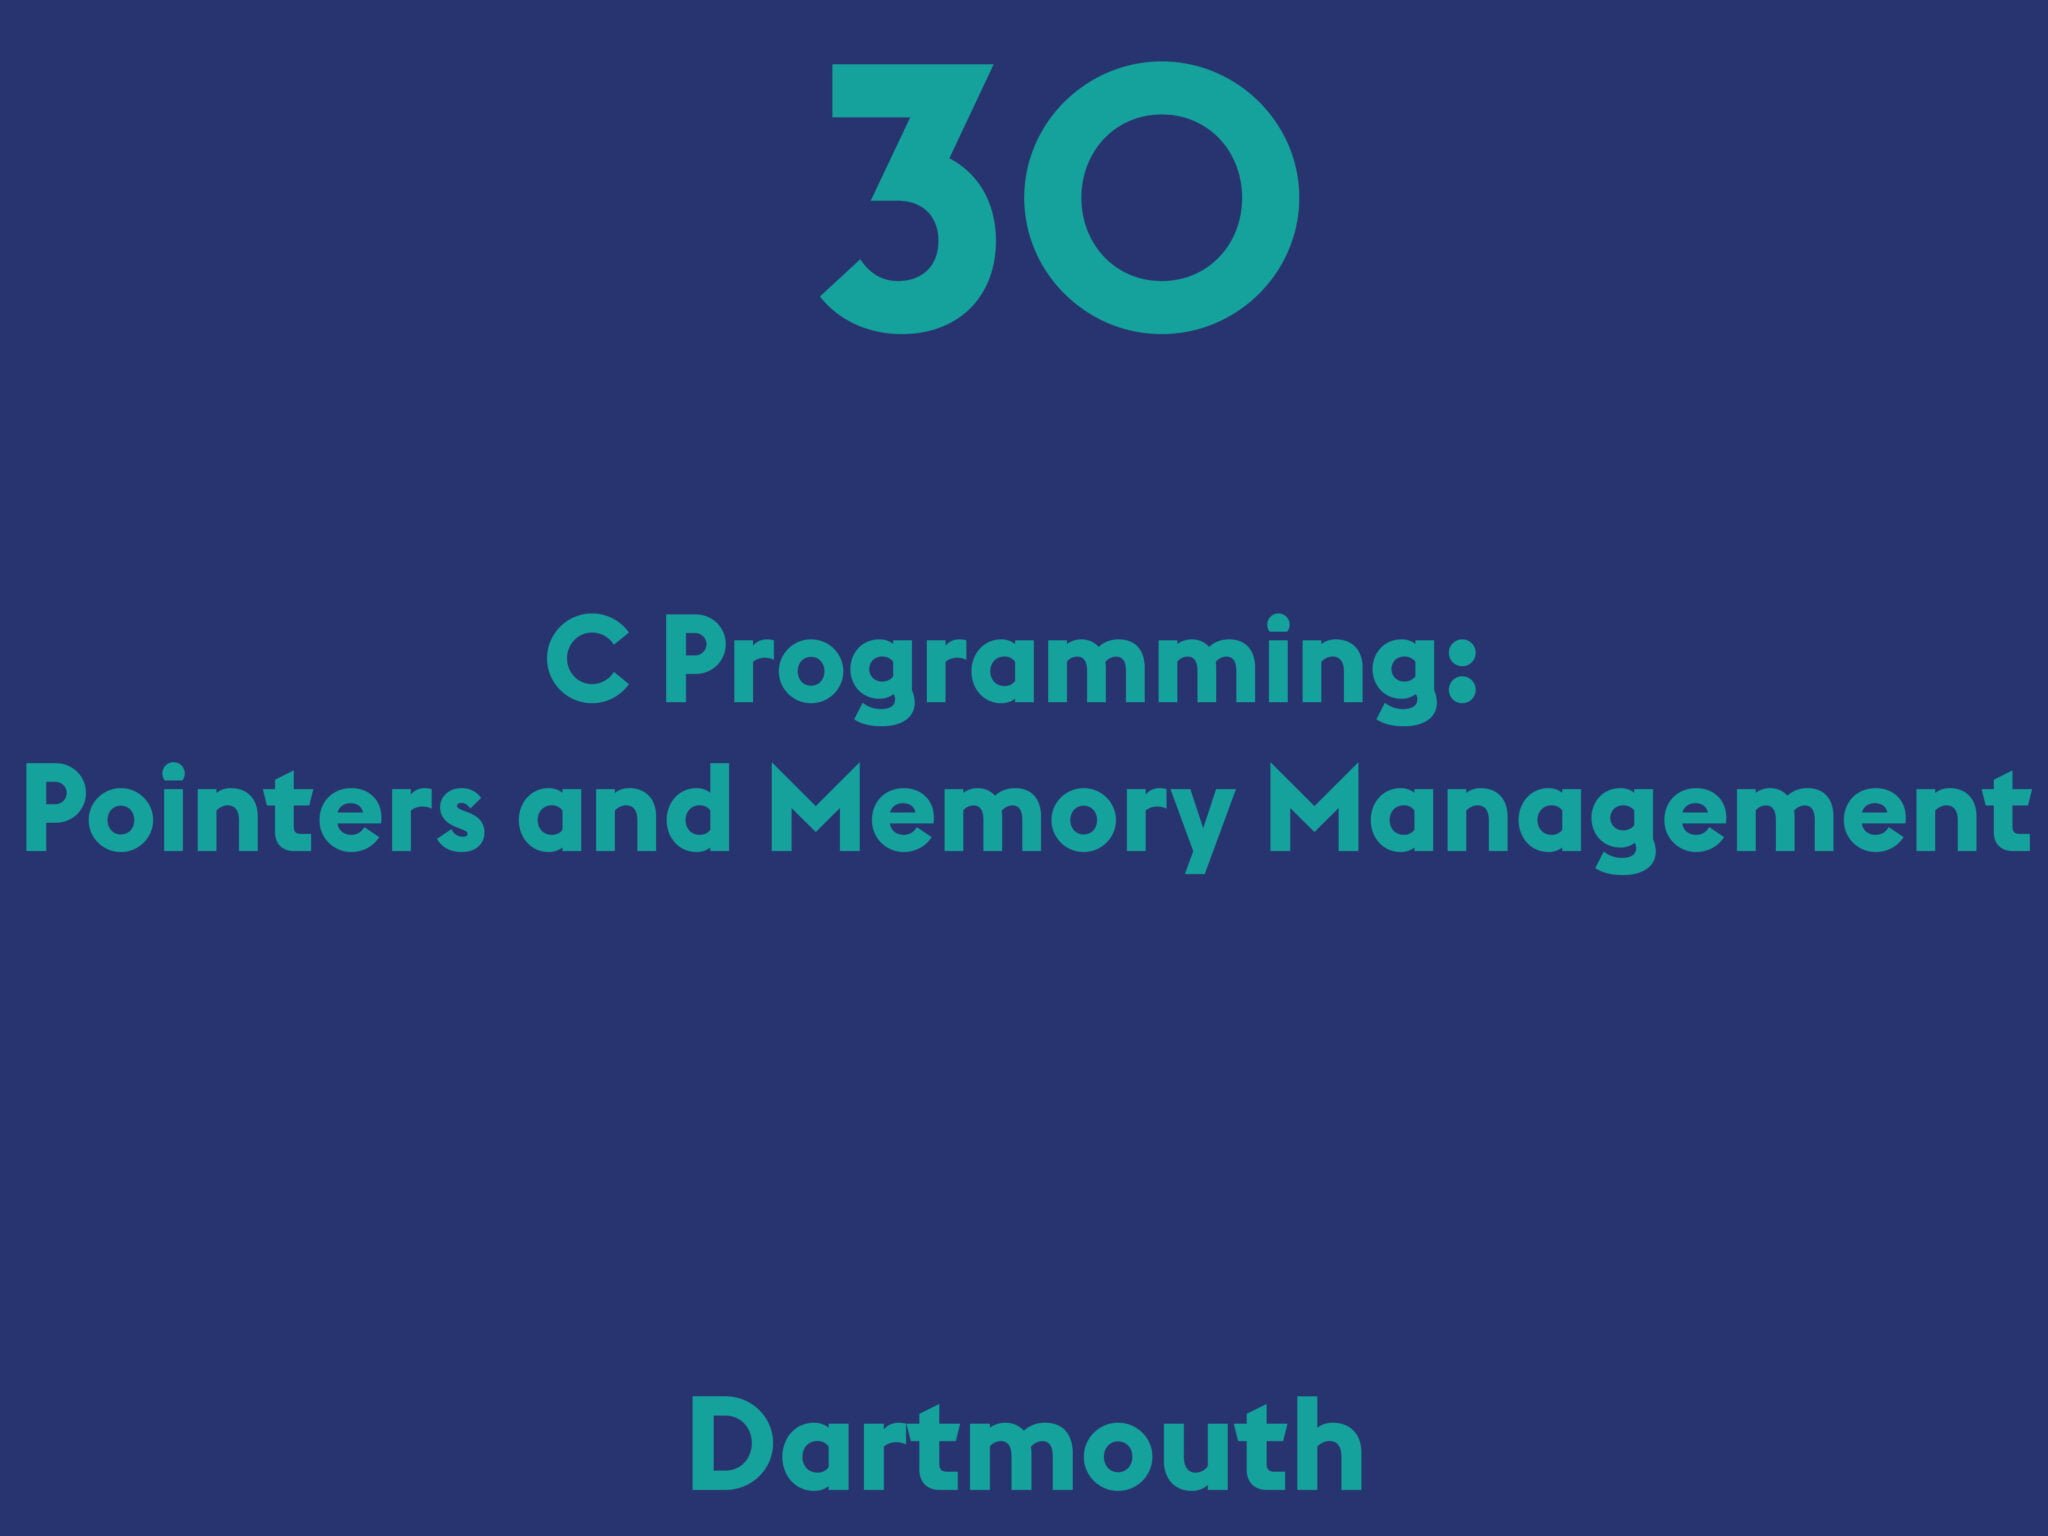 C Programming: Pointers and Memory Management